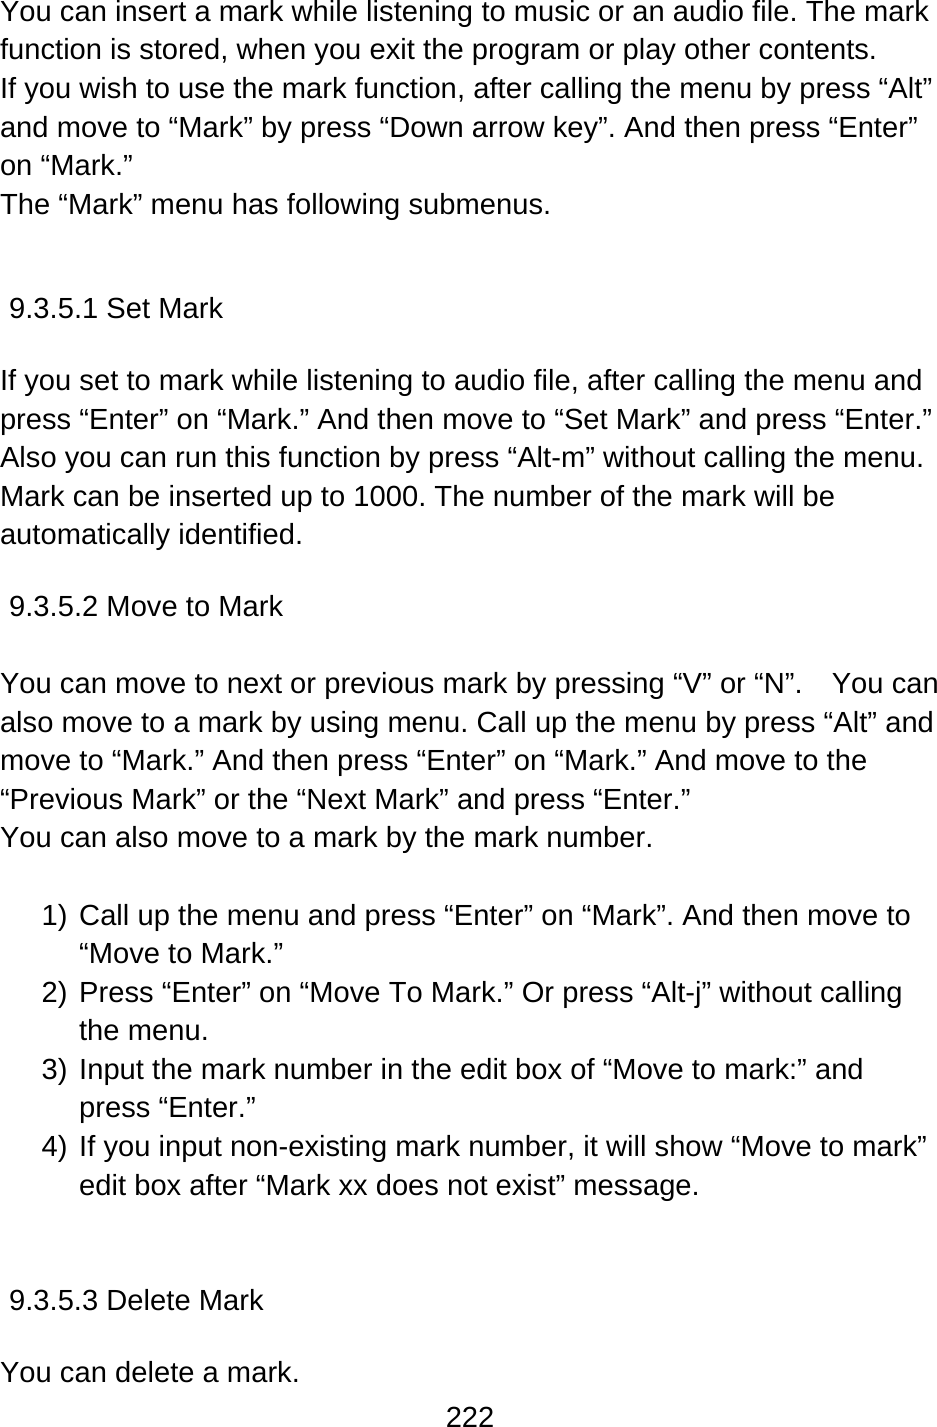 222  You can insert a mark while listening to music or an audio file. The mark function is stored, when you exit the program or play other contents.   If you wish to use the mark function, after calling the menu by press “Alt” and move to “Mark” by press “Down arrow key”. And then press “Enter” on “Mark.” The “Mark” menu has following submenus.   9.3.5.1 Set Mark  If you set to mark while listening to audio file, after calling the menu and press “Enter” on “Mark.” And then move to “Set Mark” and press “Enter.” Also you can run this function by press “Alt-m” without calling the menu. Mark can be inserted up to 1000. The number of the mark will be automatically identified.  9.3.5.2 Move to Mark  You can move to next or previous mark by pressing “V” or “N”.    You can also move to a mark by using menu. Call up the menu by press “Alt” and move to “Mark.” And then press “Enter” on “Mark.” And move to the “Previous Mark” or the “Next Mark” and press “Enter.” You can also move to a mark by the mark number.  1) Call up the menu and press “Enter” on “Mark”. And then move to “Move to Mark.” 2) Press “Enter” on “Move To Mark.” Or press “Alt-j” without calling the menu. 3) Input the mark number in the edit box of “Move to mark:” and press “Enter.” 4) If you input non-existing mark number, it will show “Move to mark” edit box after “Mark xx does not exist” message.   9.3.5.3 Delete Mark  You can delete a mark. 